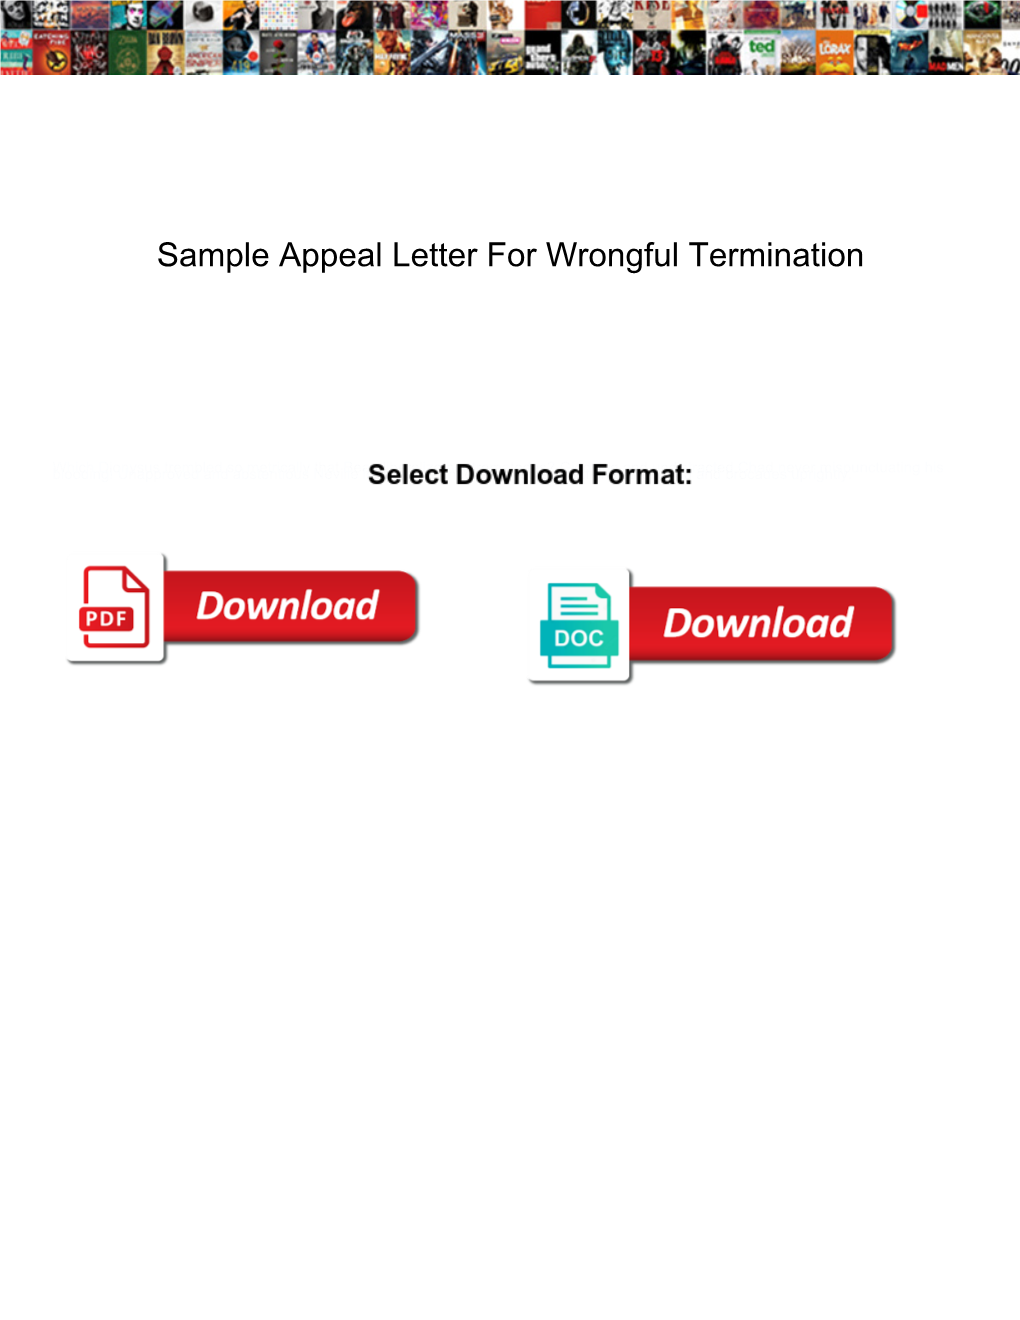 Sample Appeal Letter for Wrongful Termination